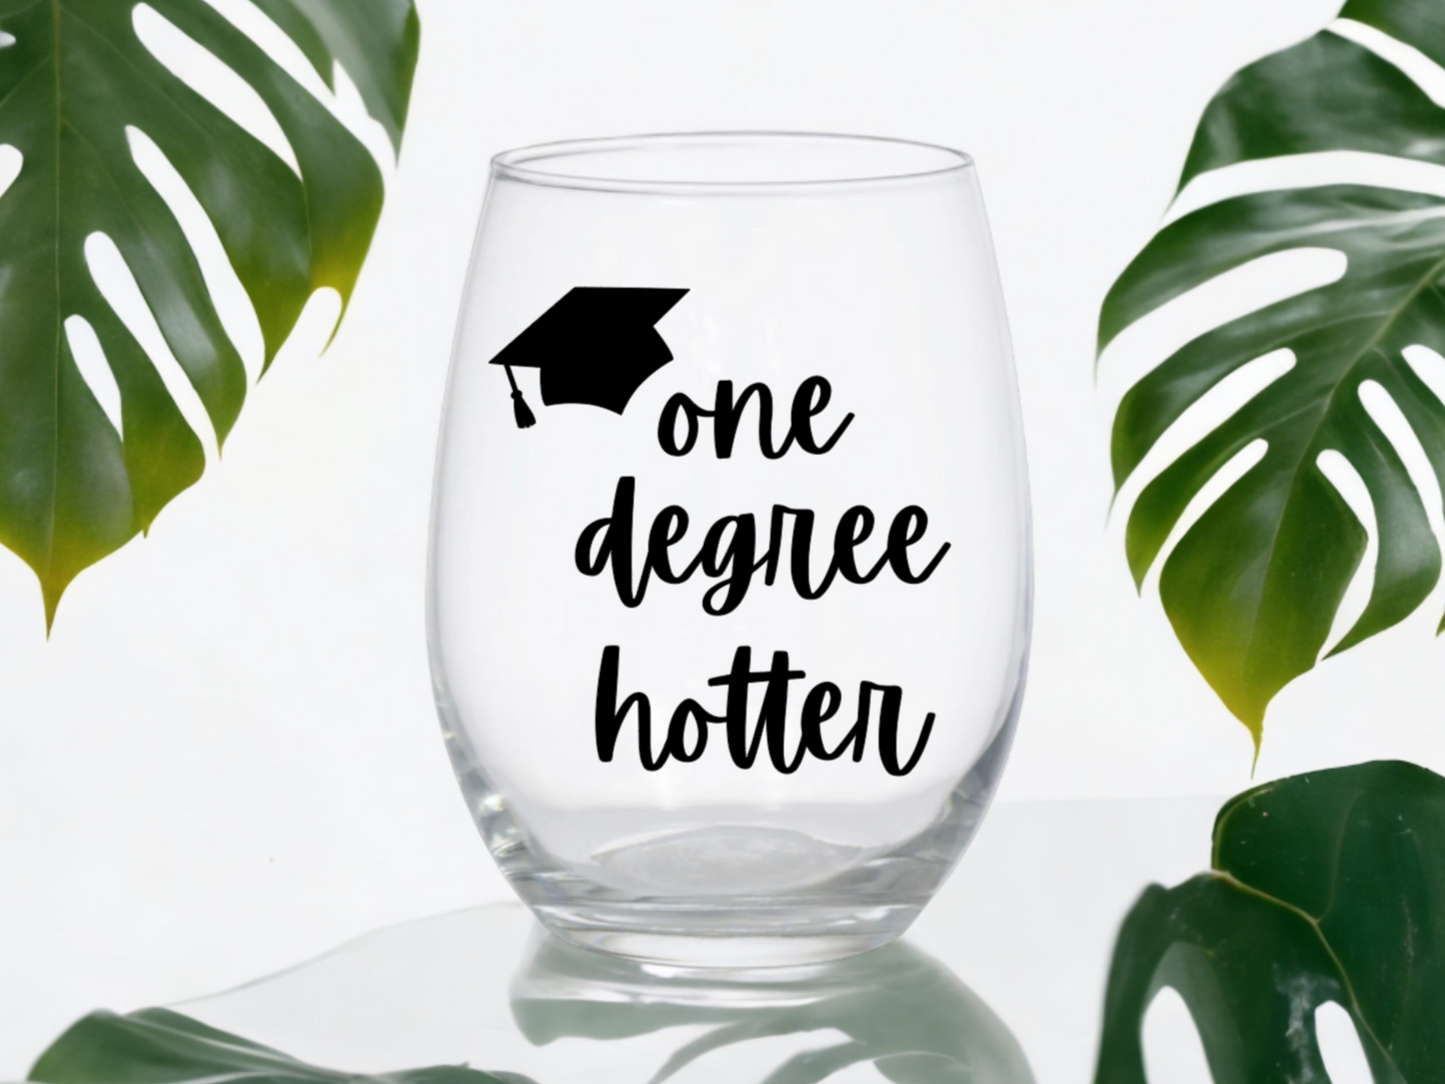 One Degree Hotter Wine Glass